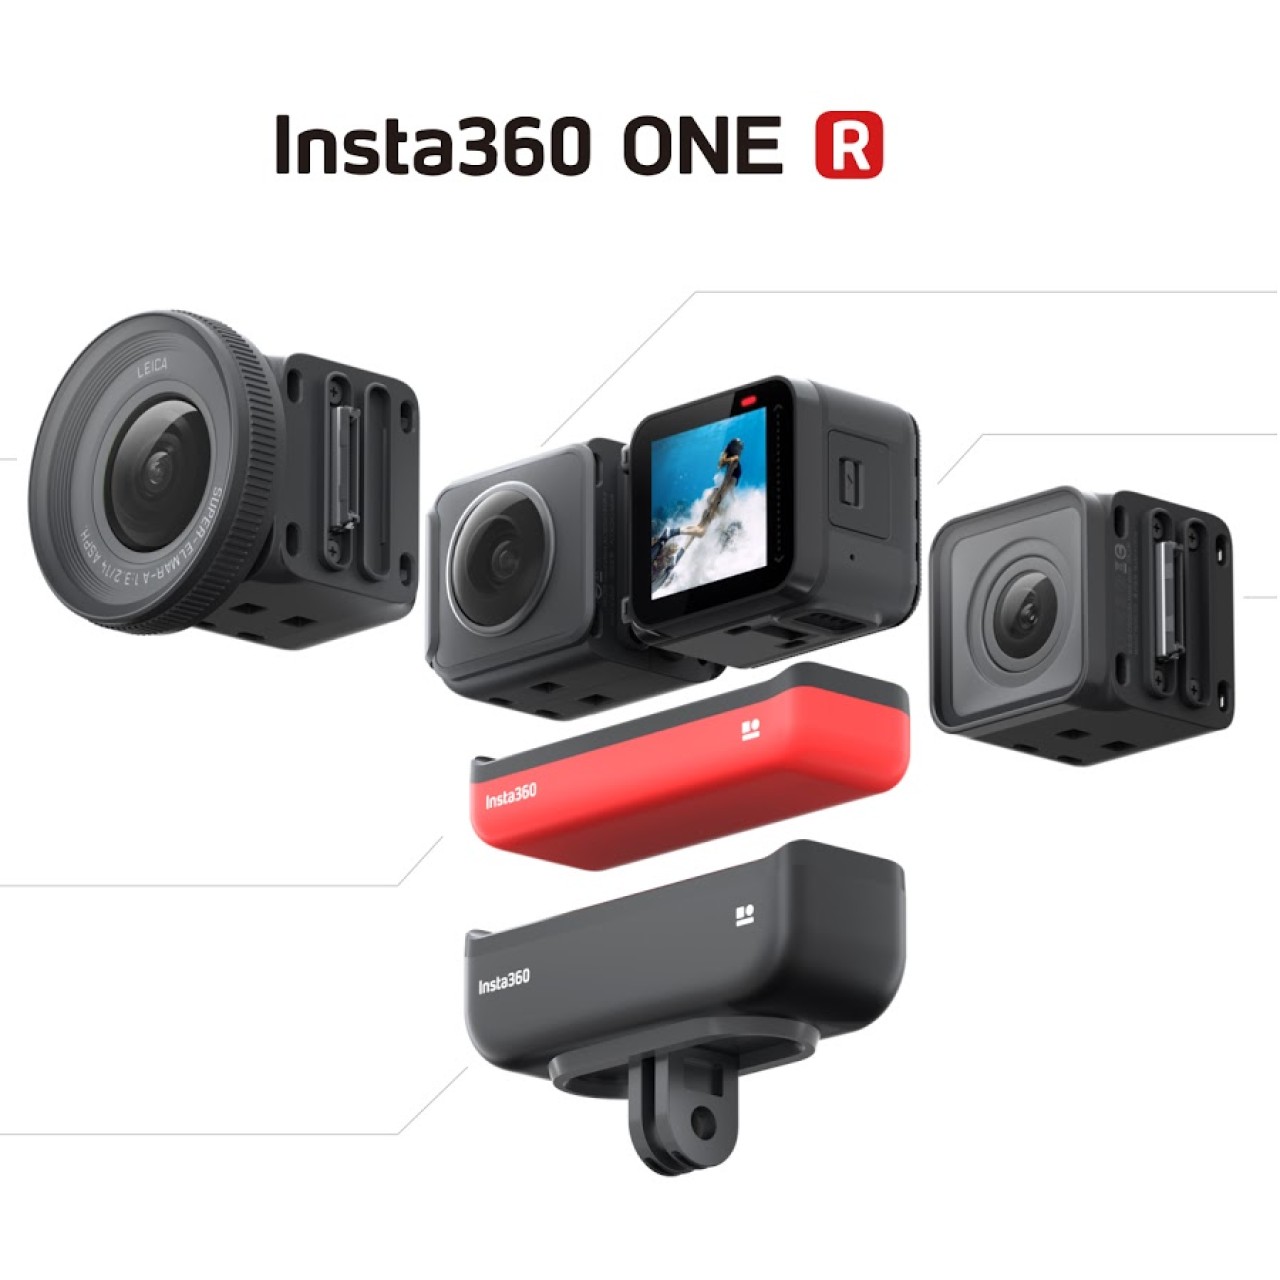 Insta360 S Modular One R Can Transform Into A Gopro Competitor Or A 360 Camera South China Morning Post